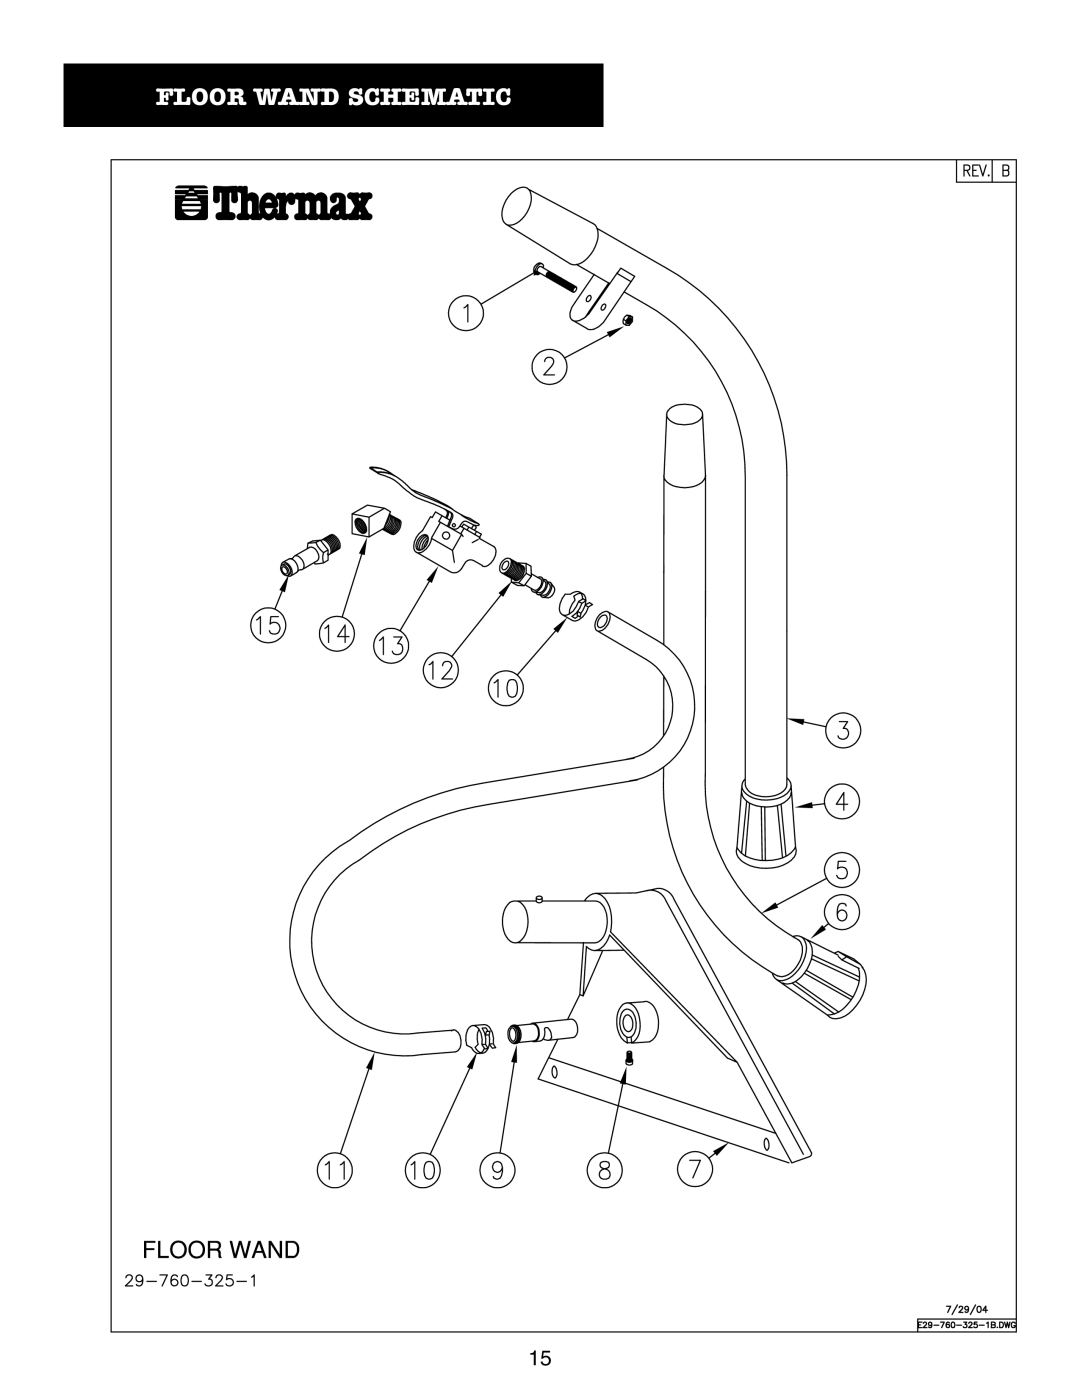 Thermax CP3 manual Floor Wand Schematic 